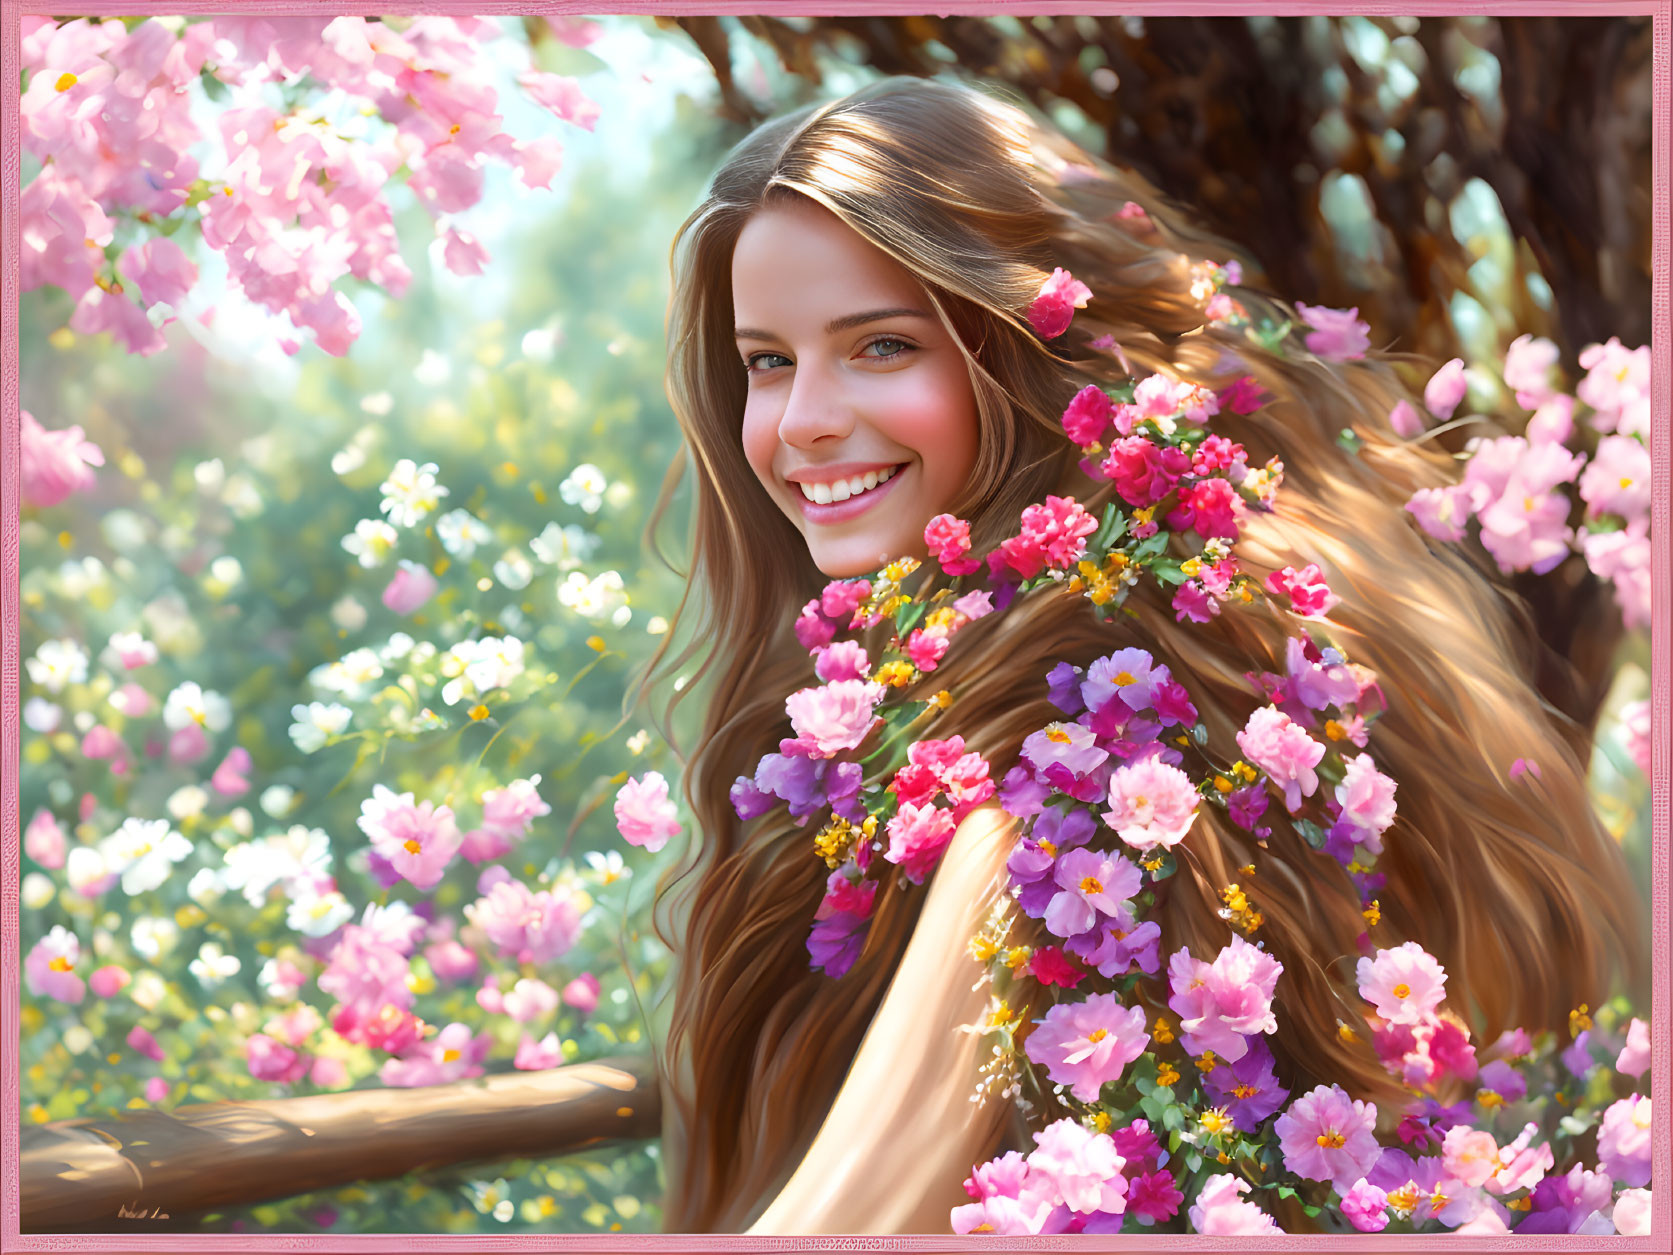 Smiling woman with flowers in hair under blossoming tree